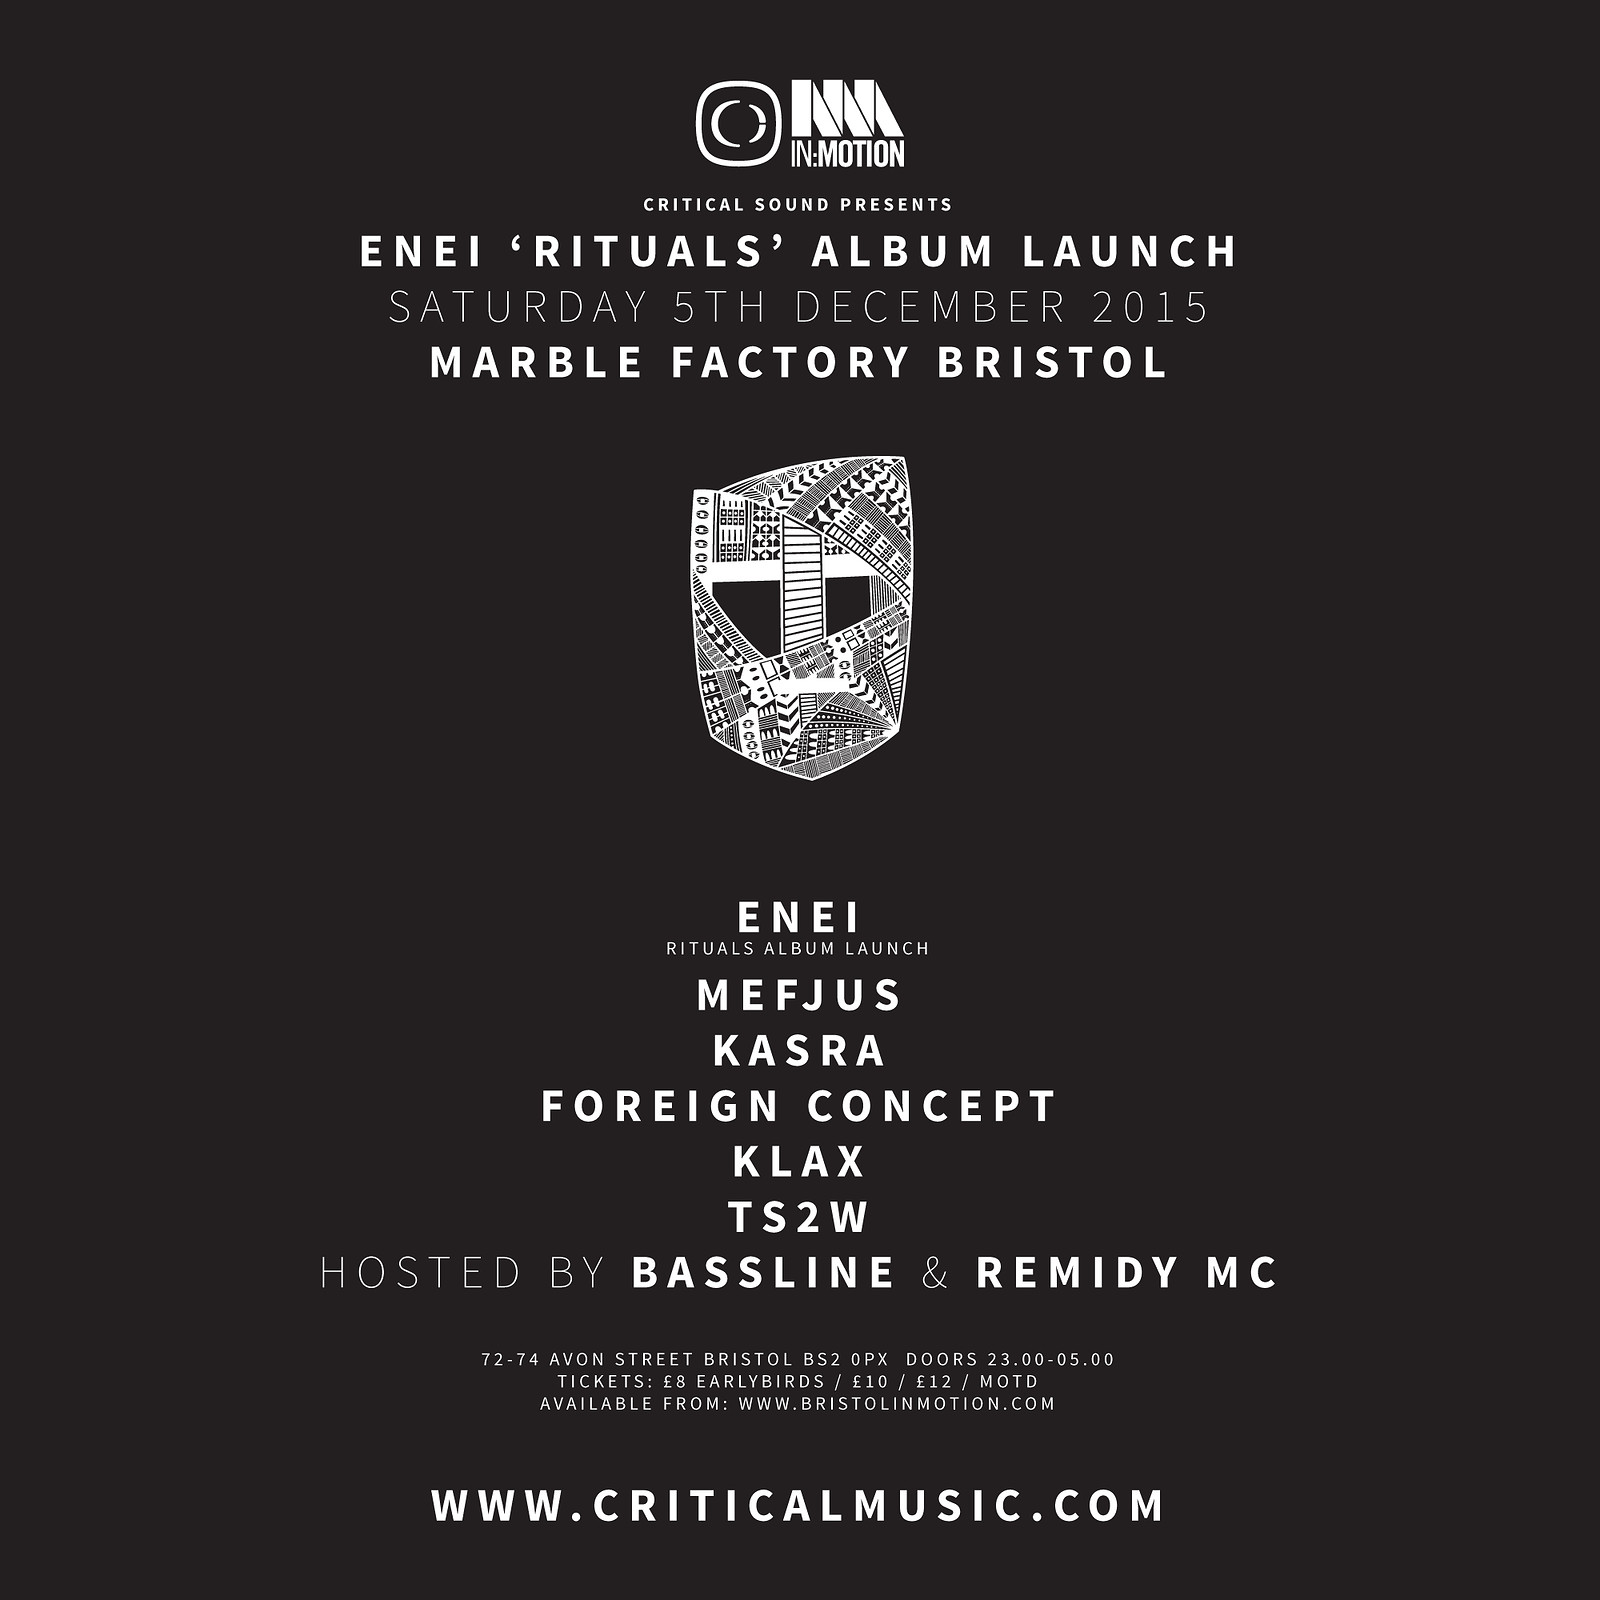 Critical Sound Presents Enei at The Marble Factory